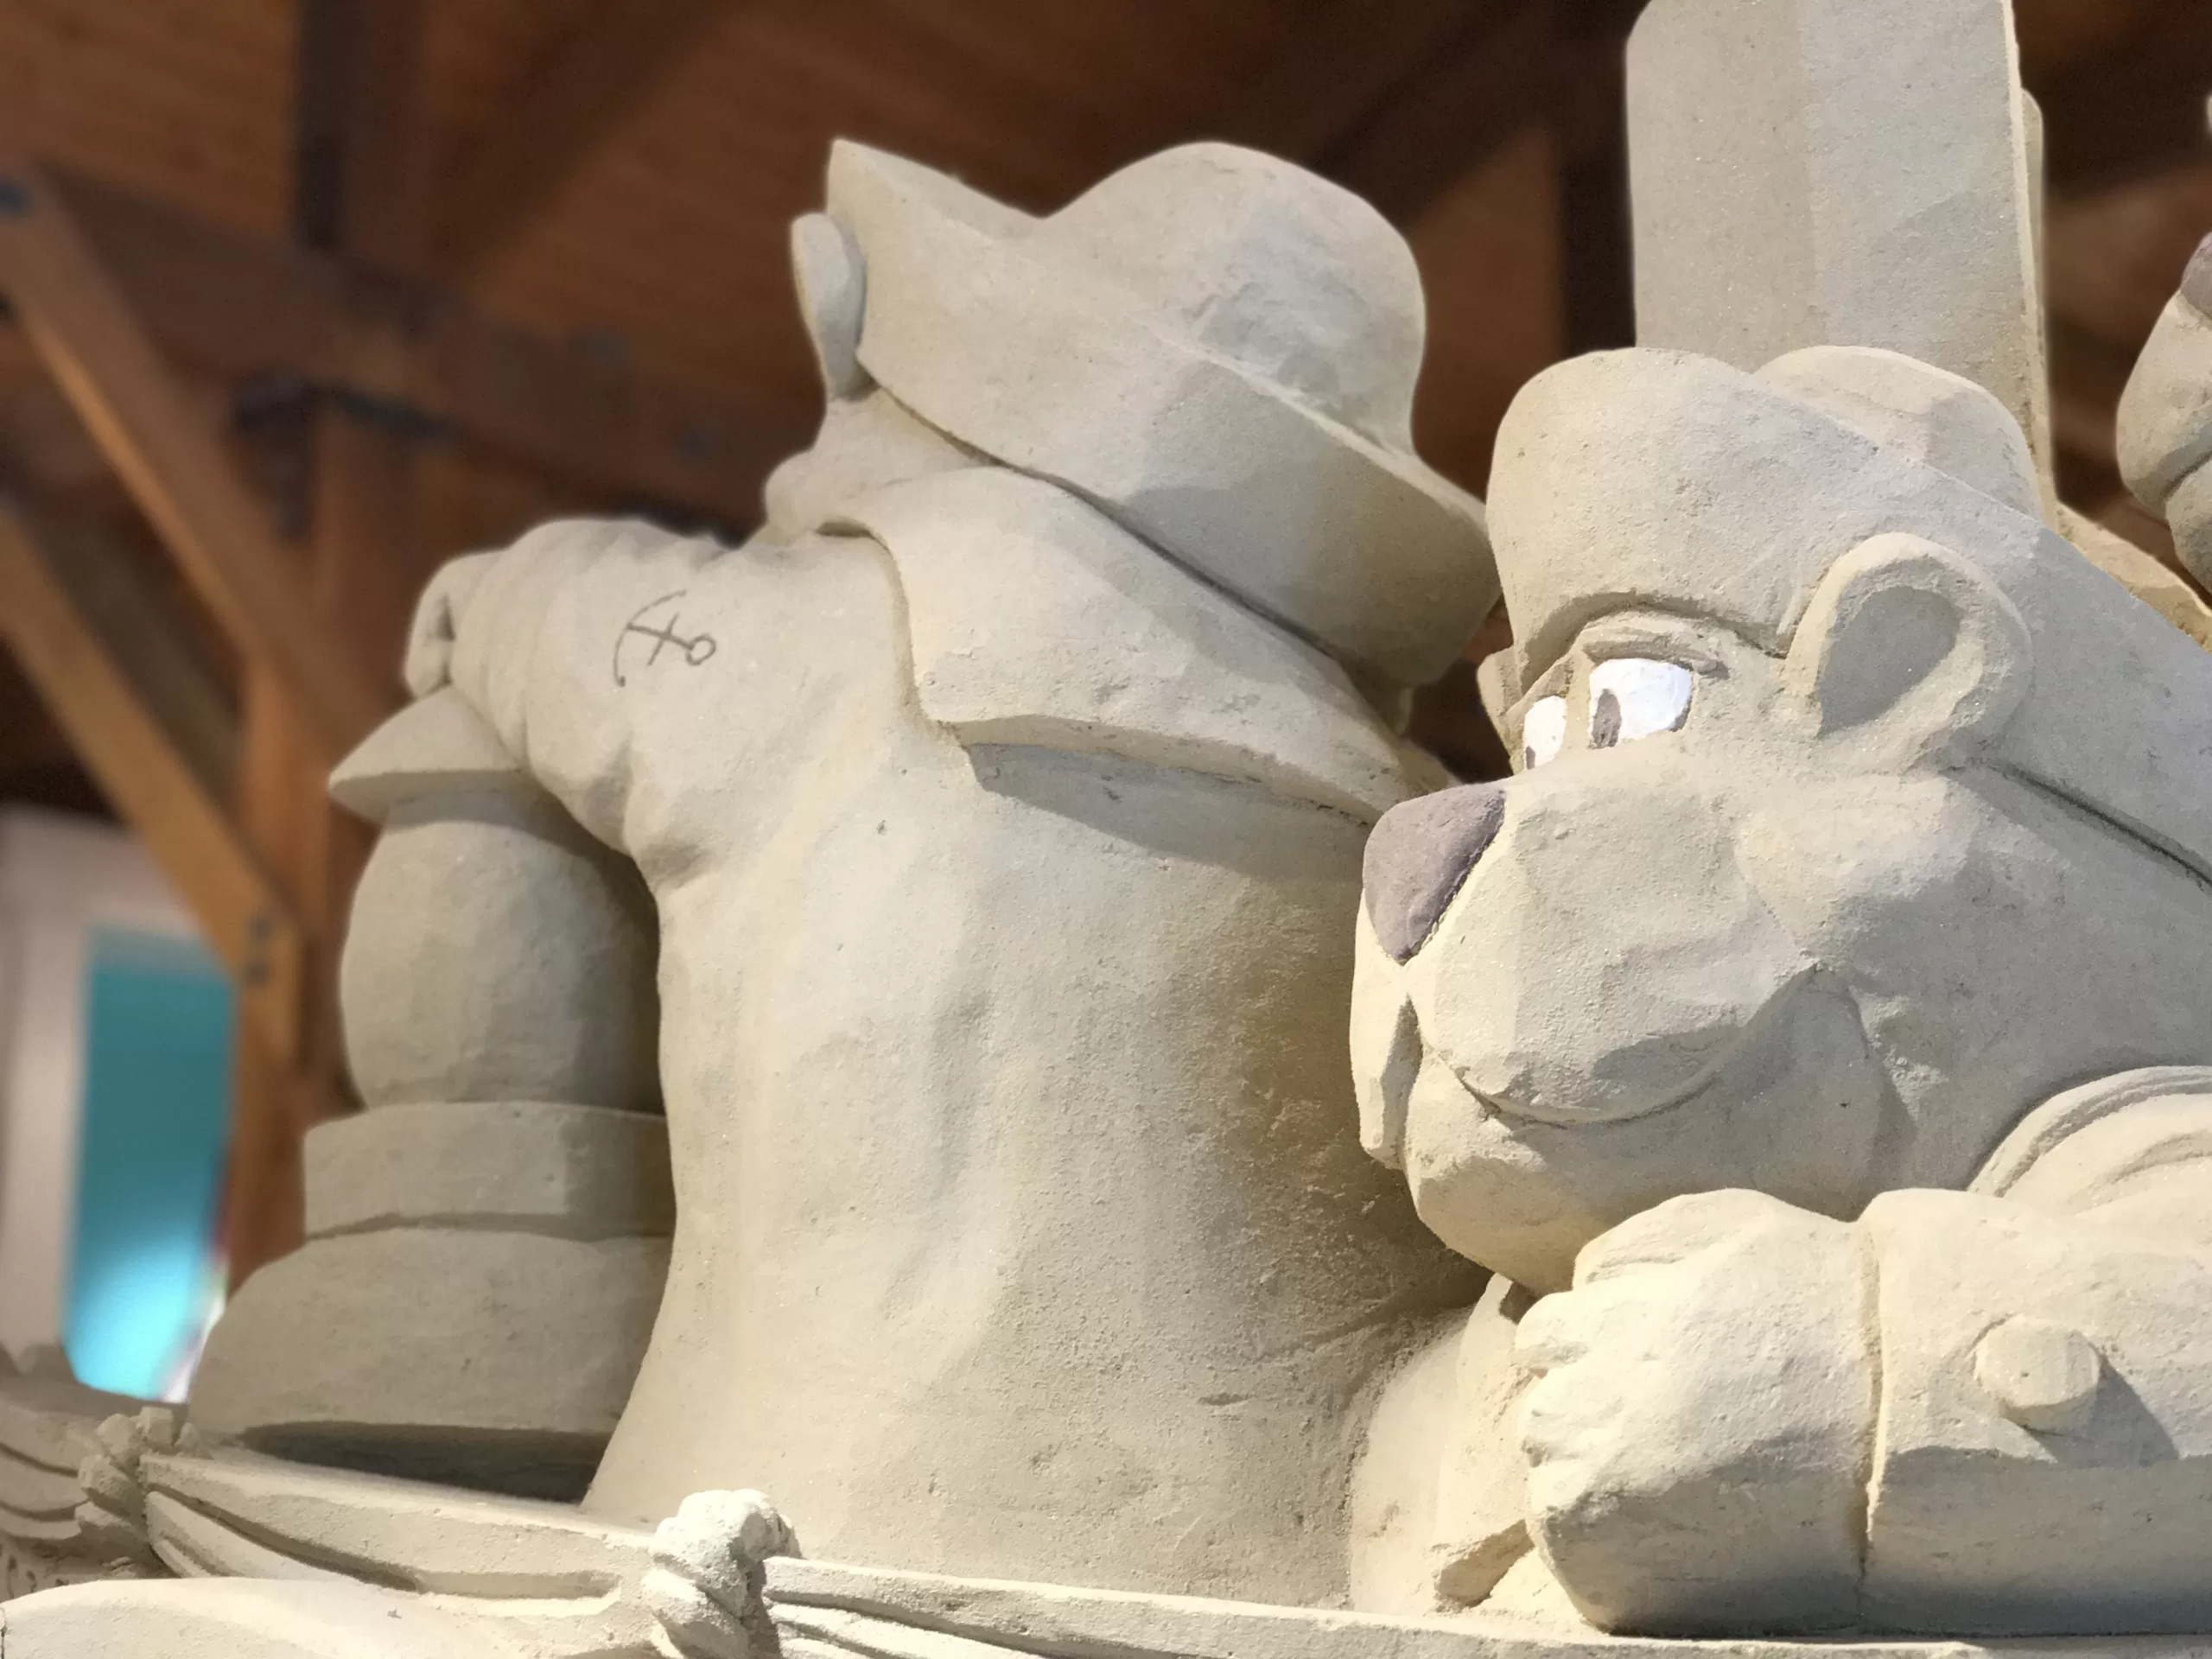 A sand sculpture of bears on a boat wearing sailing uniforms inside of Cuffy's in West Dennis, Massachusetts. One bear's face is visible, looking out into the distance.